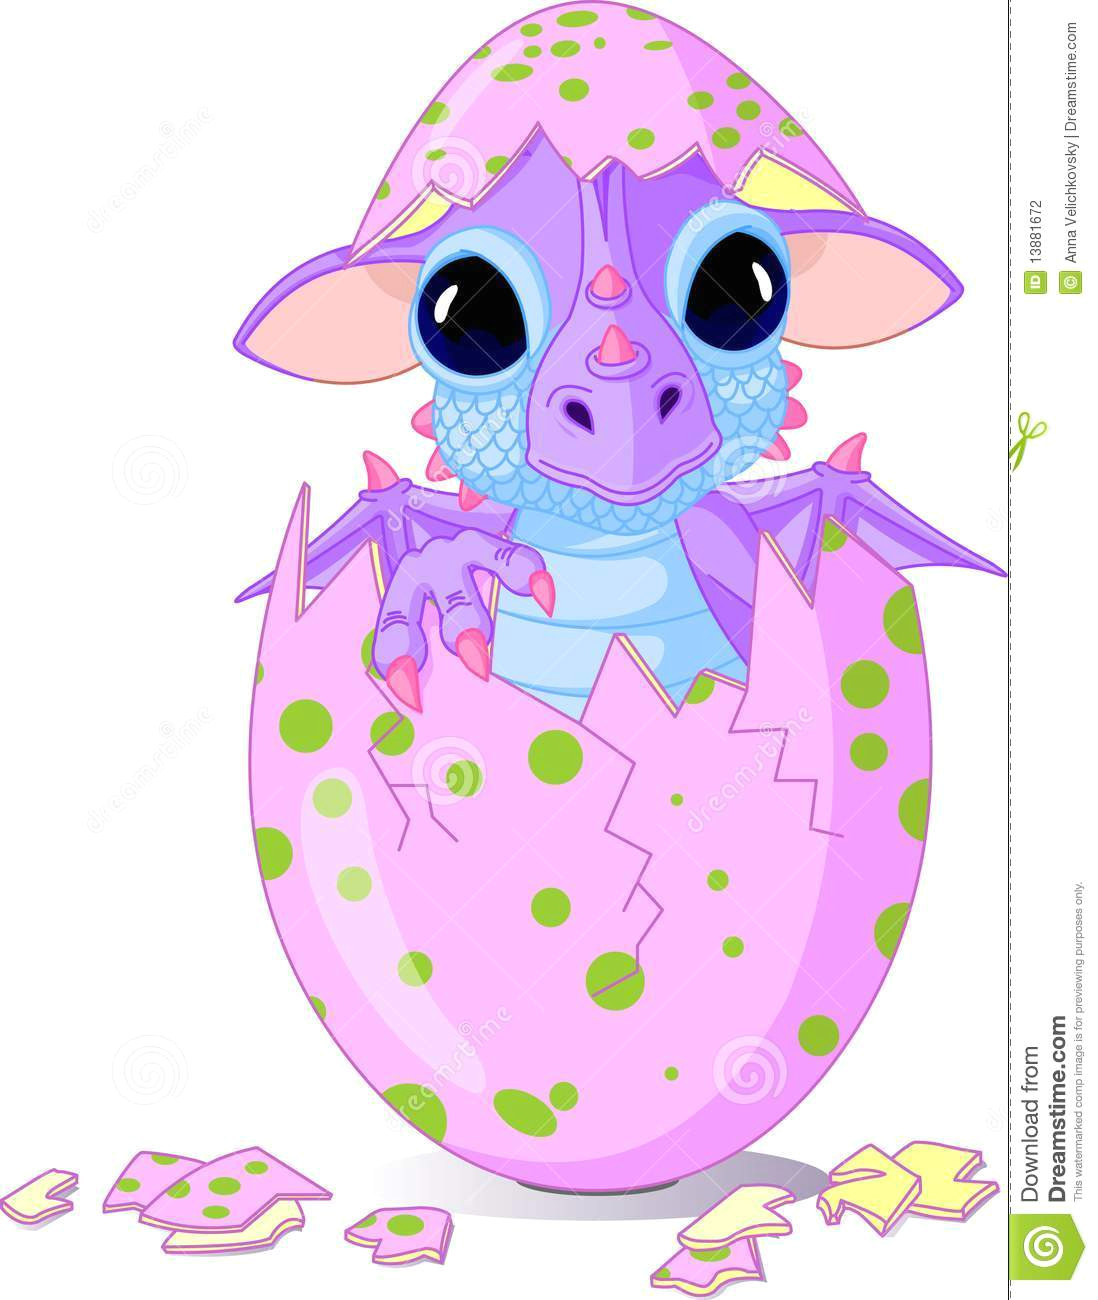 Drawings Of Baby Dragons Hatching Baby Dragon Hatched From One Egg Stock Illustration Illustration